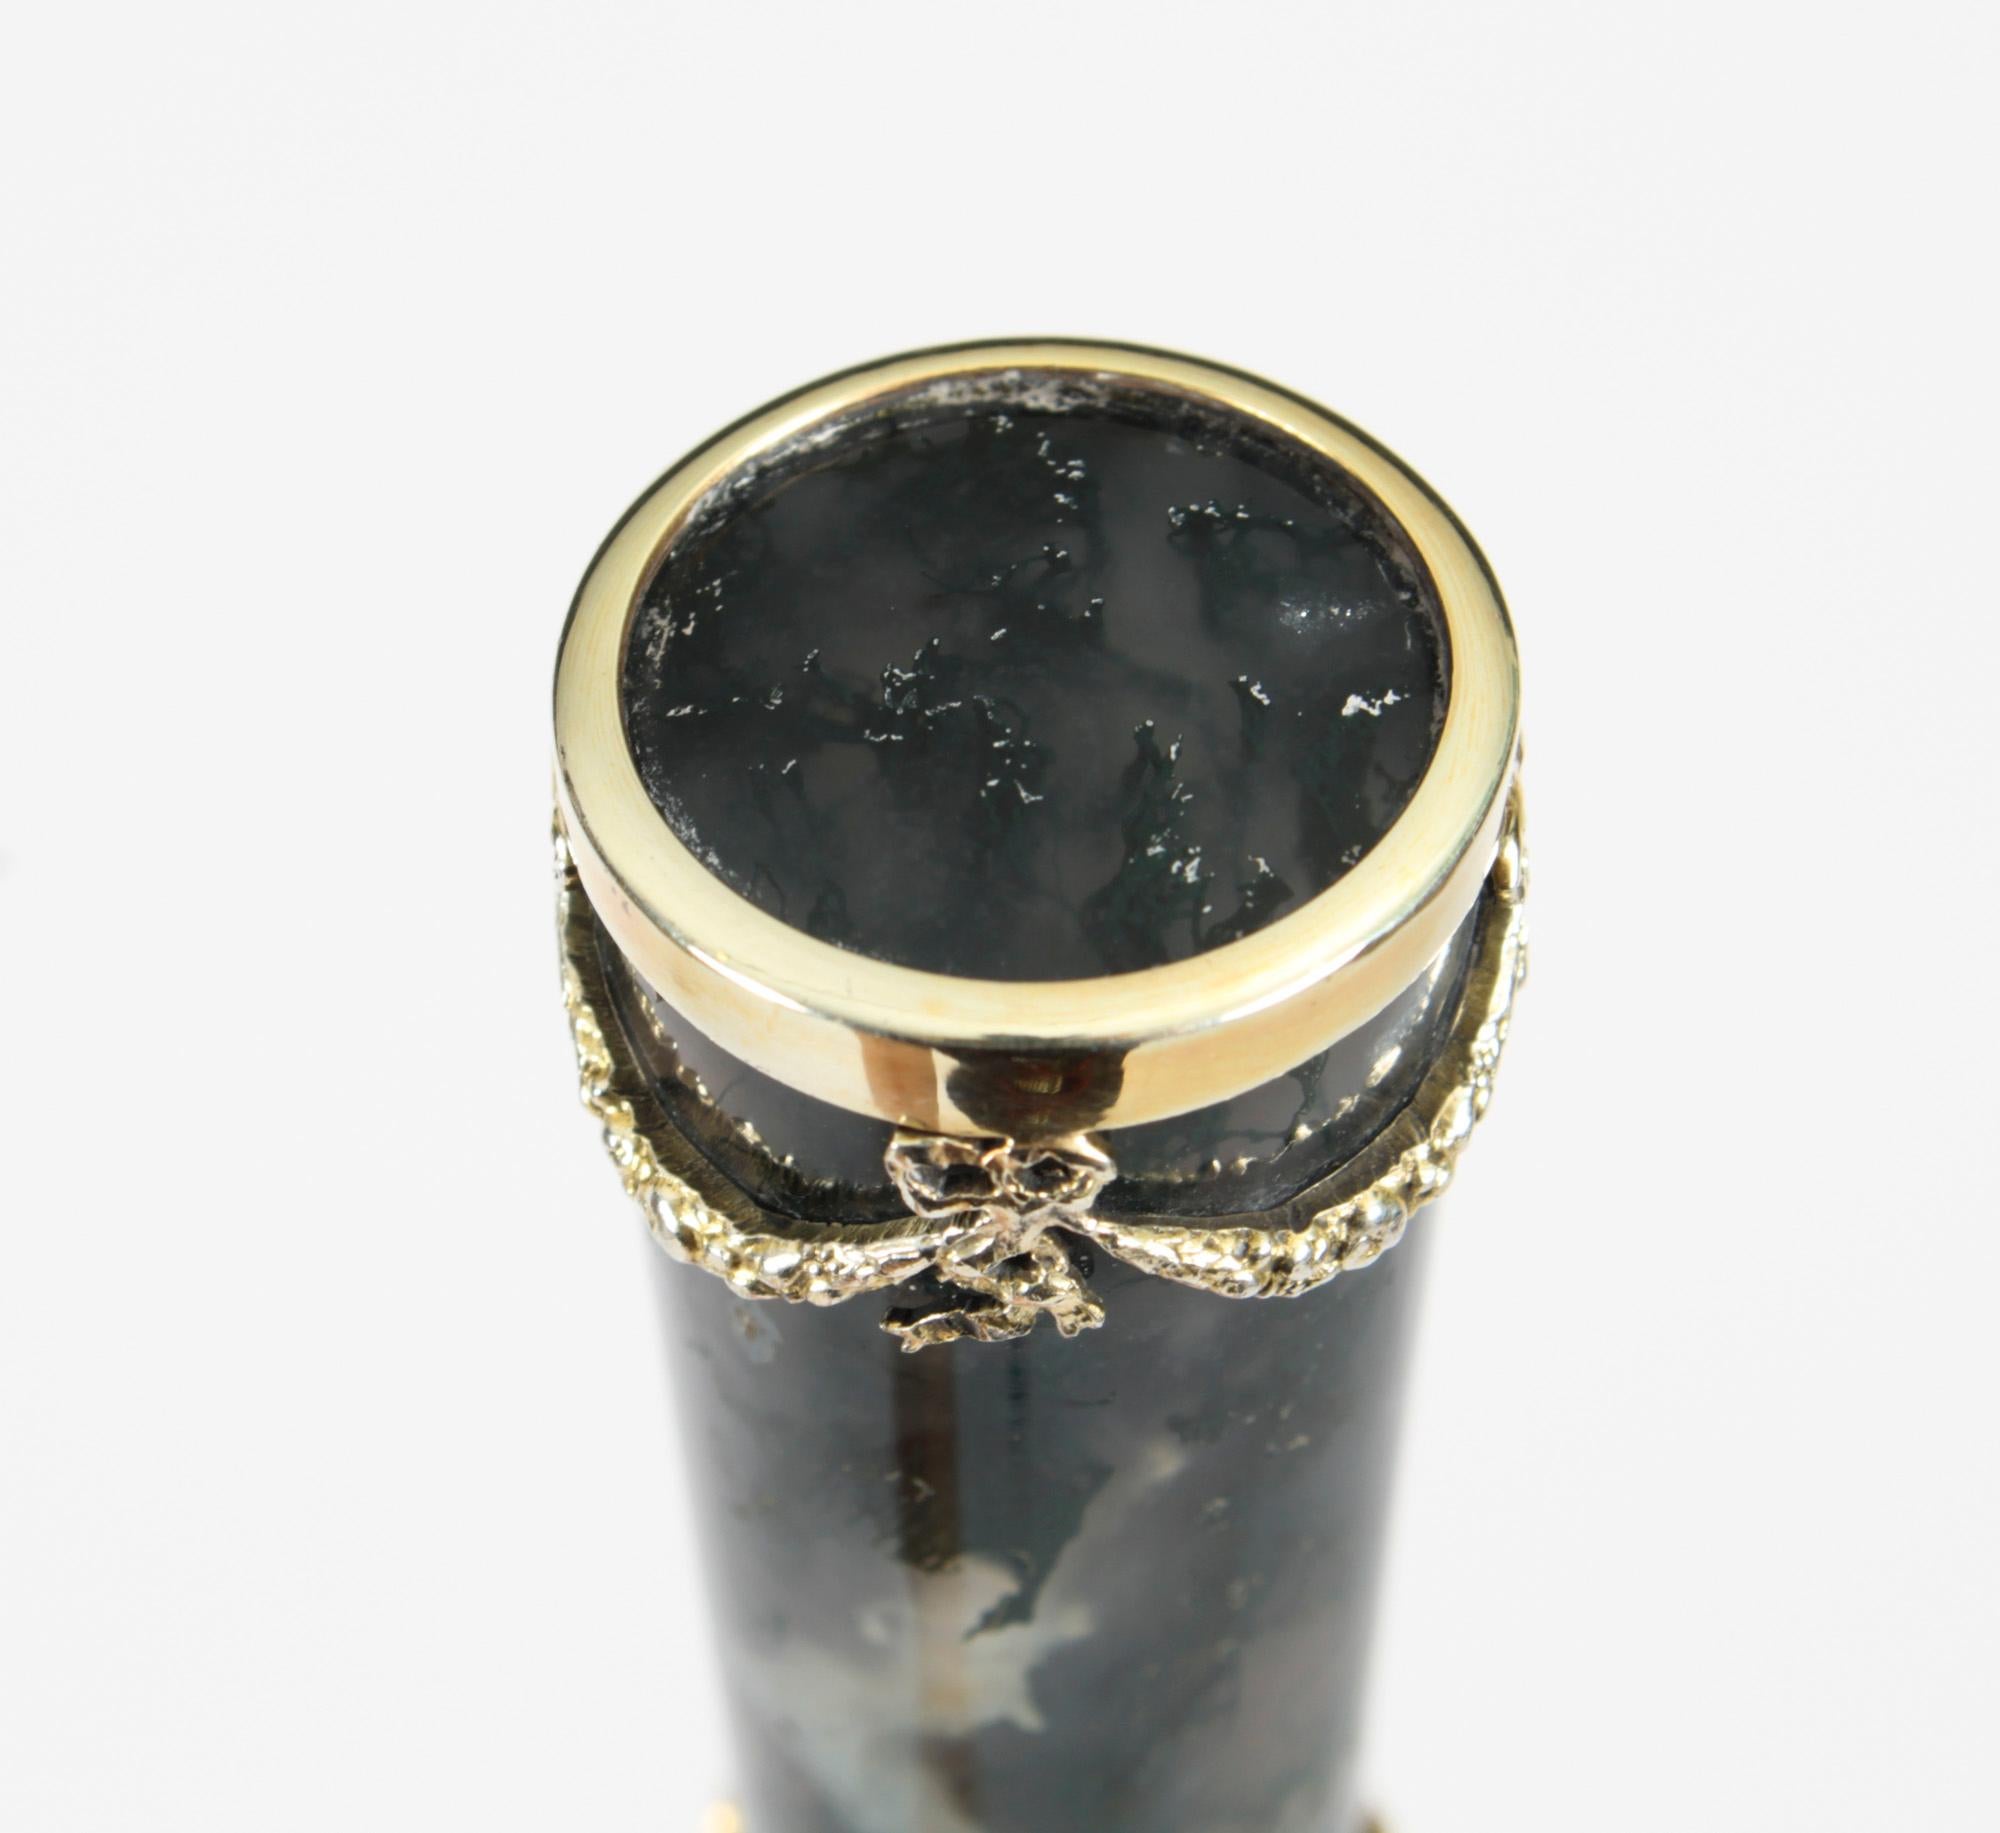 Neoclassical Revival Antique Moss Agate Sterling Silver Walking Stick Cane George Adam Schied 1900